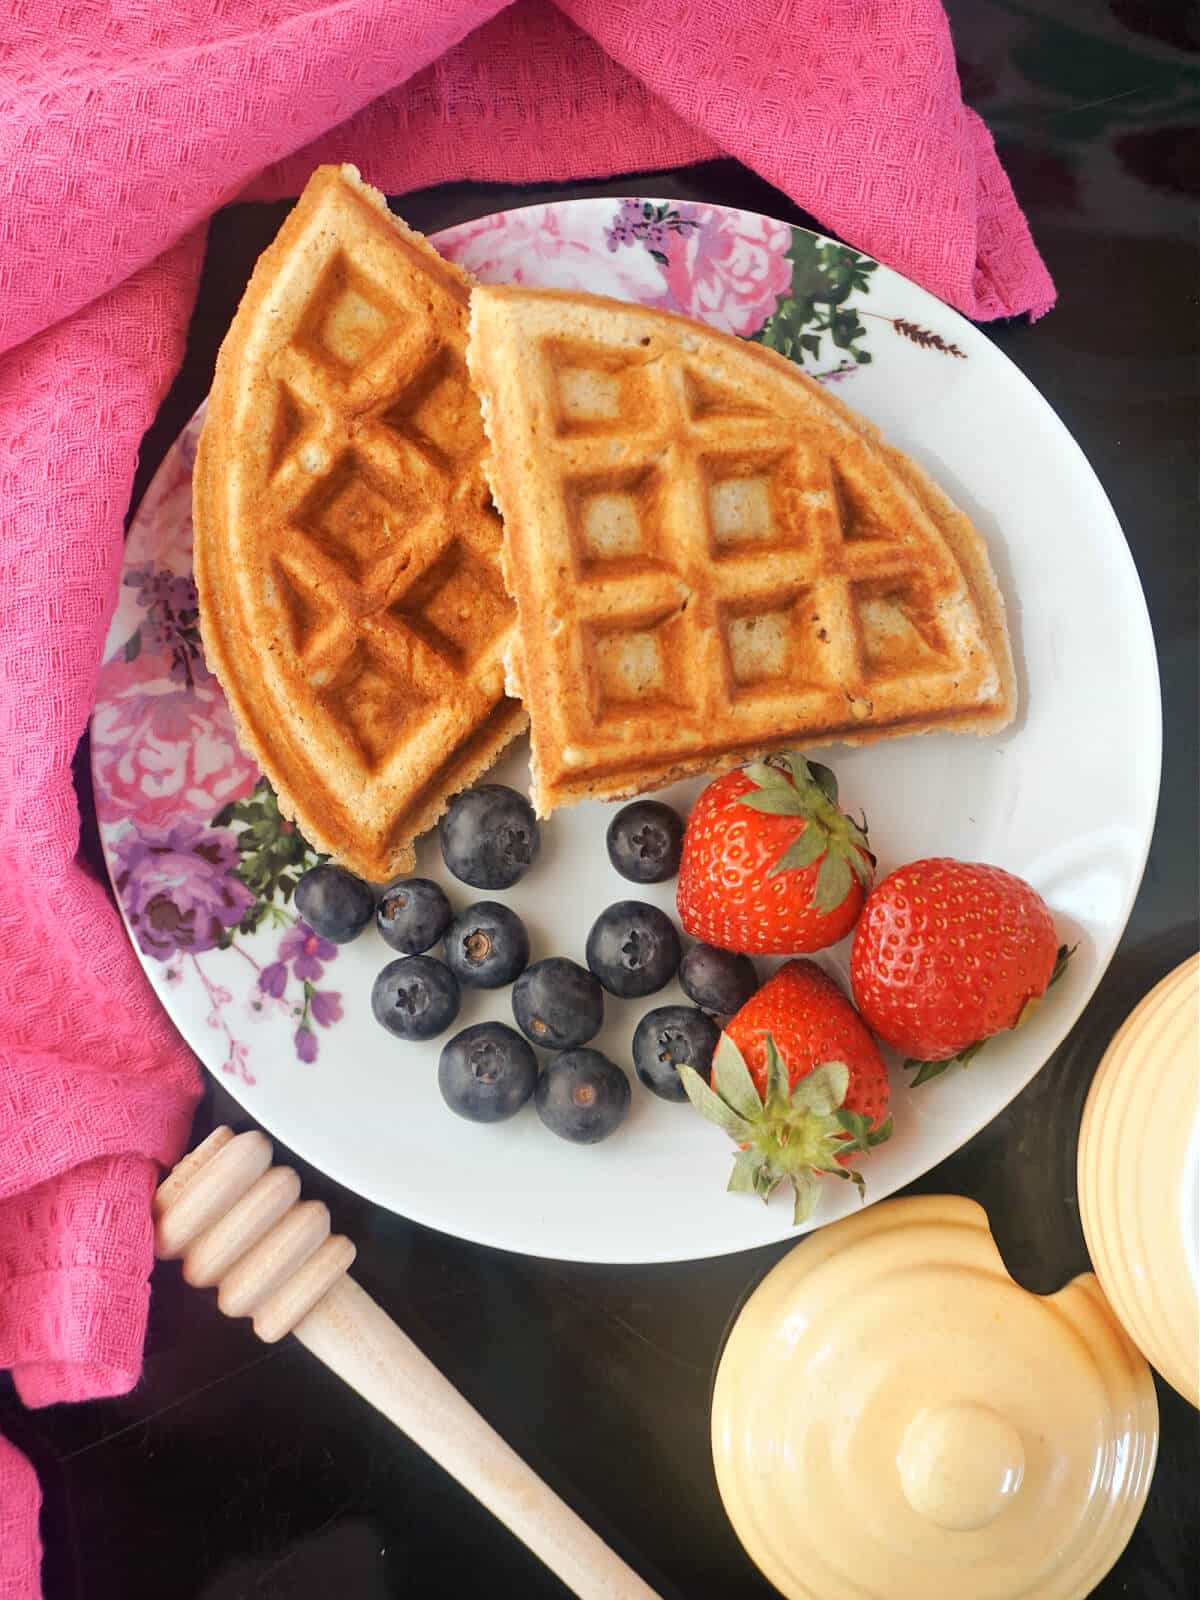 Overhead shoot of a plate with 2 waffles, blueberries and 3 strawberries